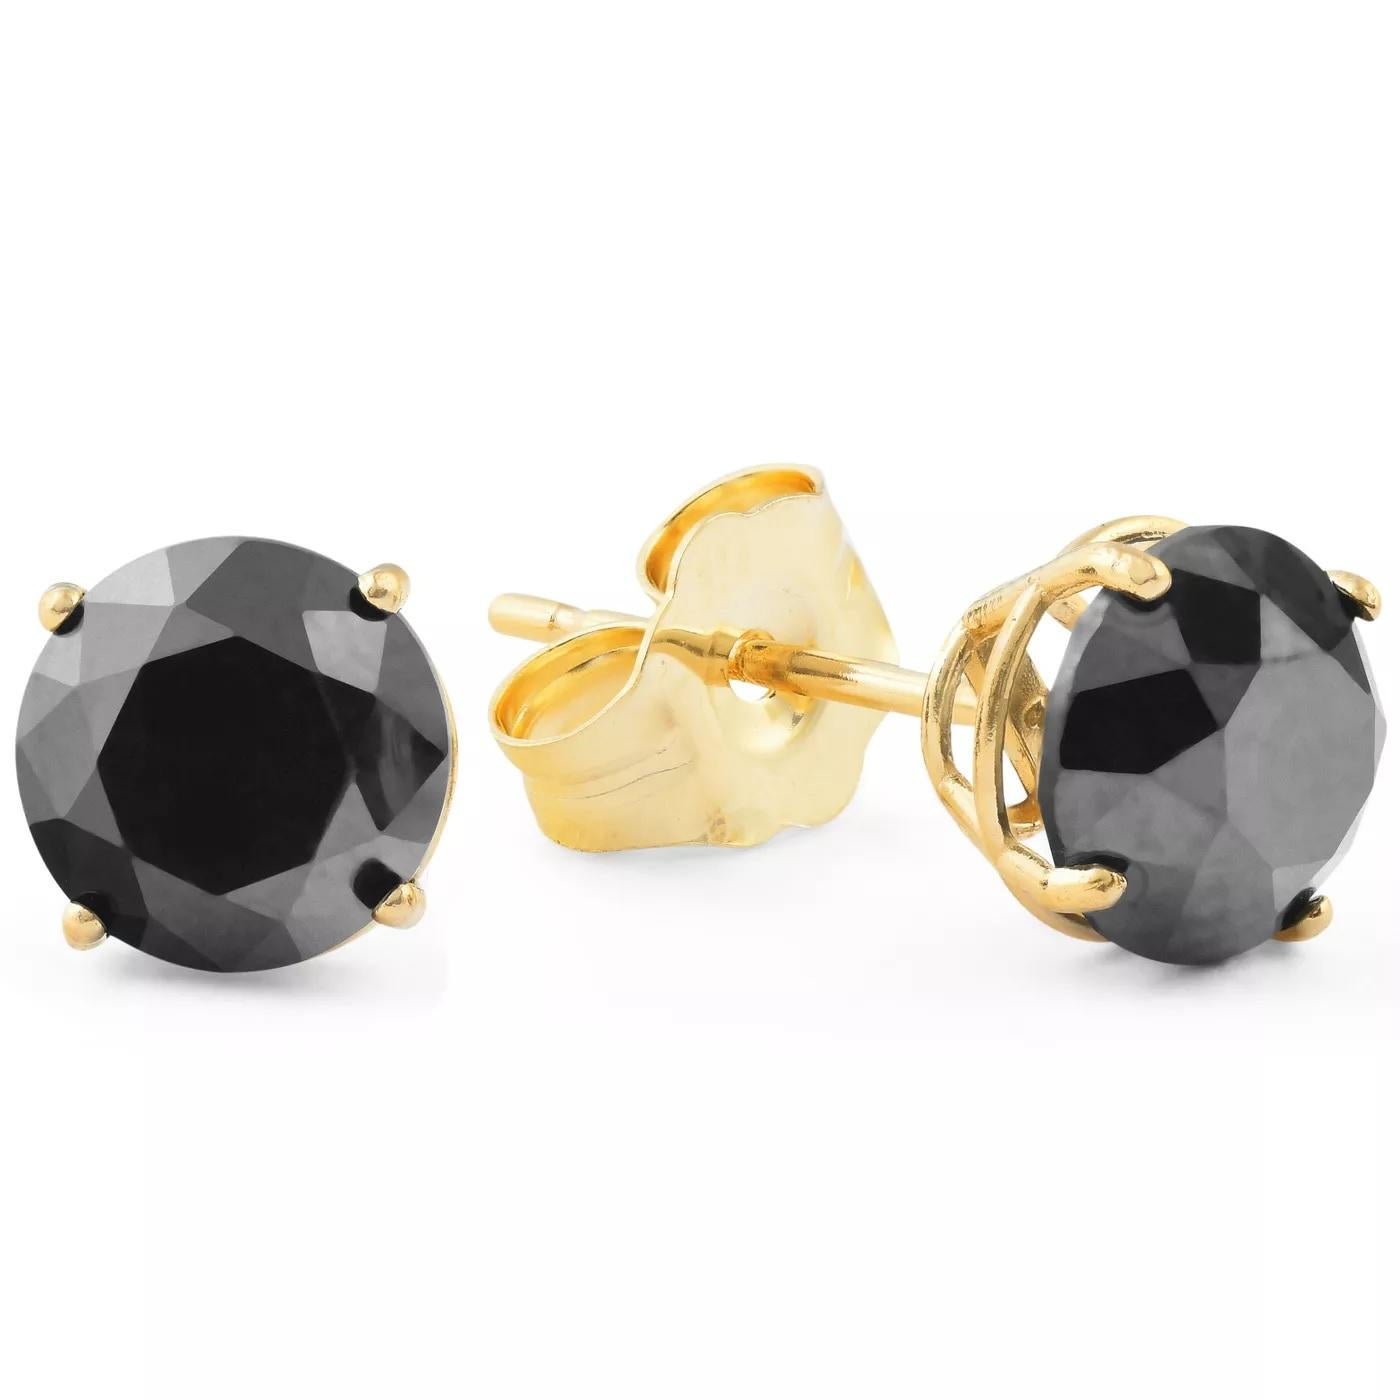 Alluring and refined, these diamond stud earrings are sure to be noticed. Created in 14 K yellow gold, the earring showcases a beguiling 1.51 carat natural black diamond solitaire measuring 6.75 x 6.70 x 4.79 mm. Exquisitely made and Captivating